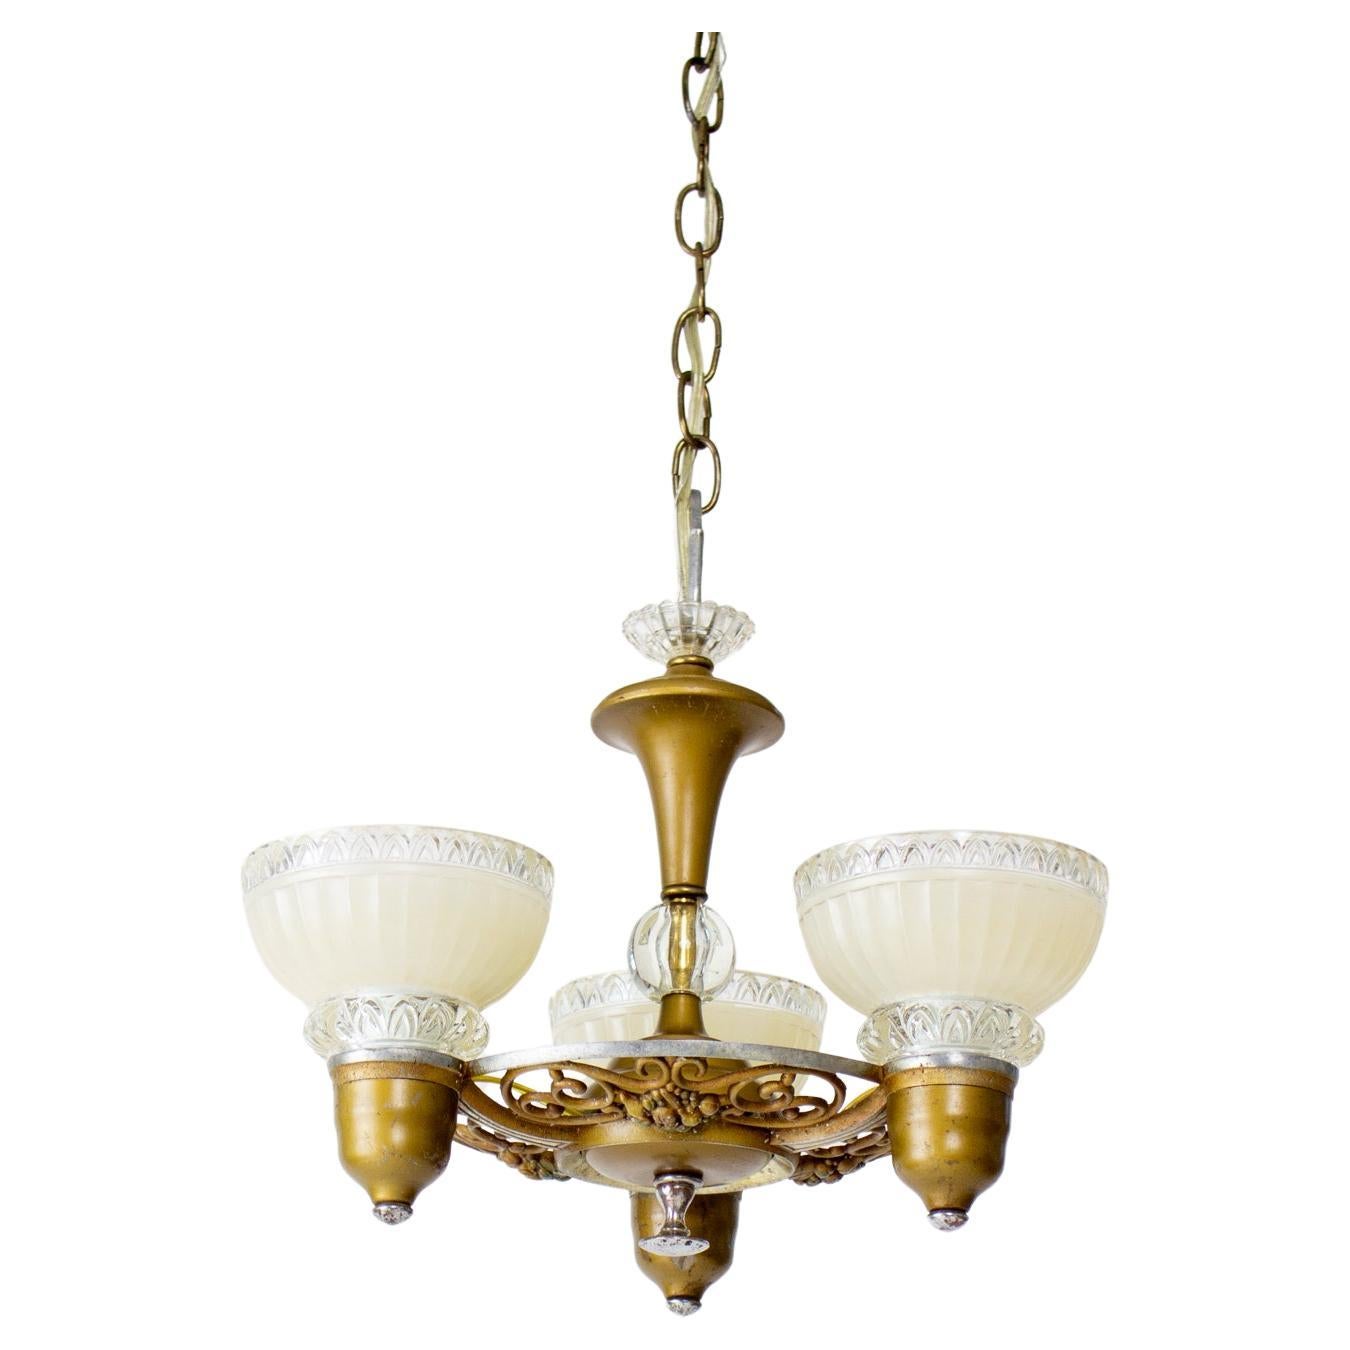 1930’s Art Deco Chandelier with Cream and Clear Glass Shades For Sale